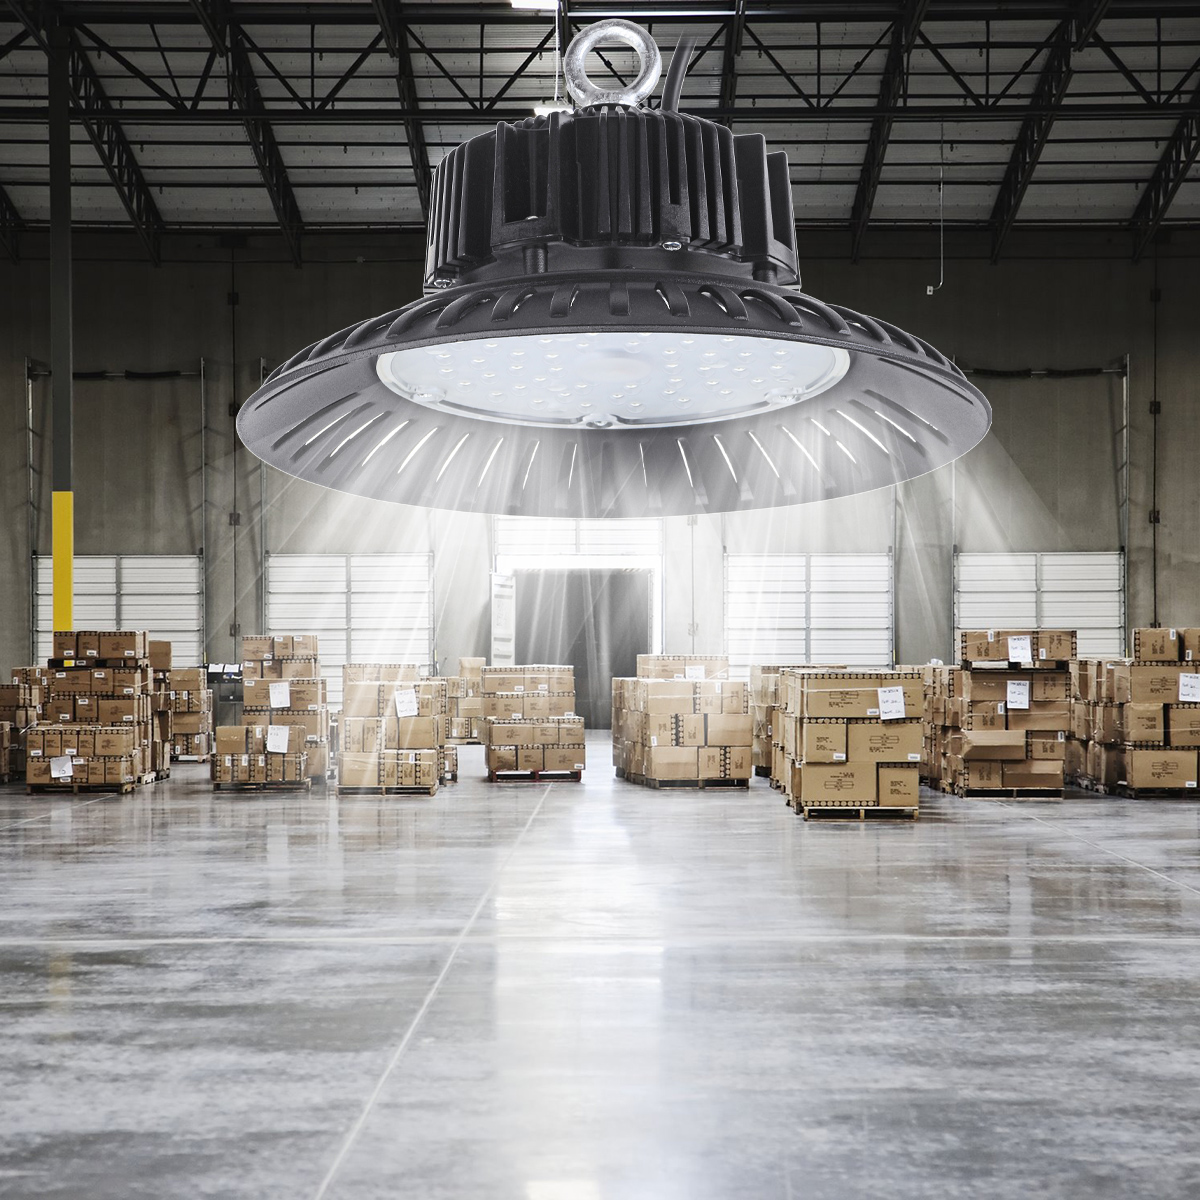 Find 60/100/150/200W UFO LED Flood Light High Bay 6000K Warehouse Industrial Lighting for Sale on Gipsybee.com with cryptocurrencies